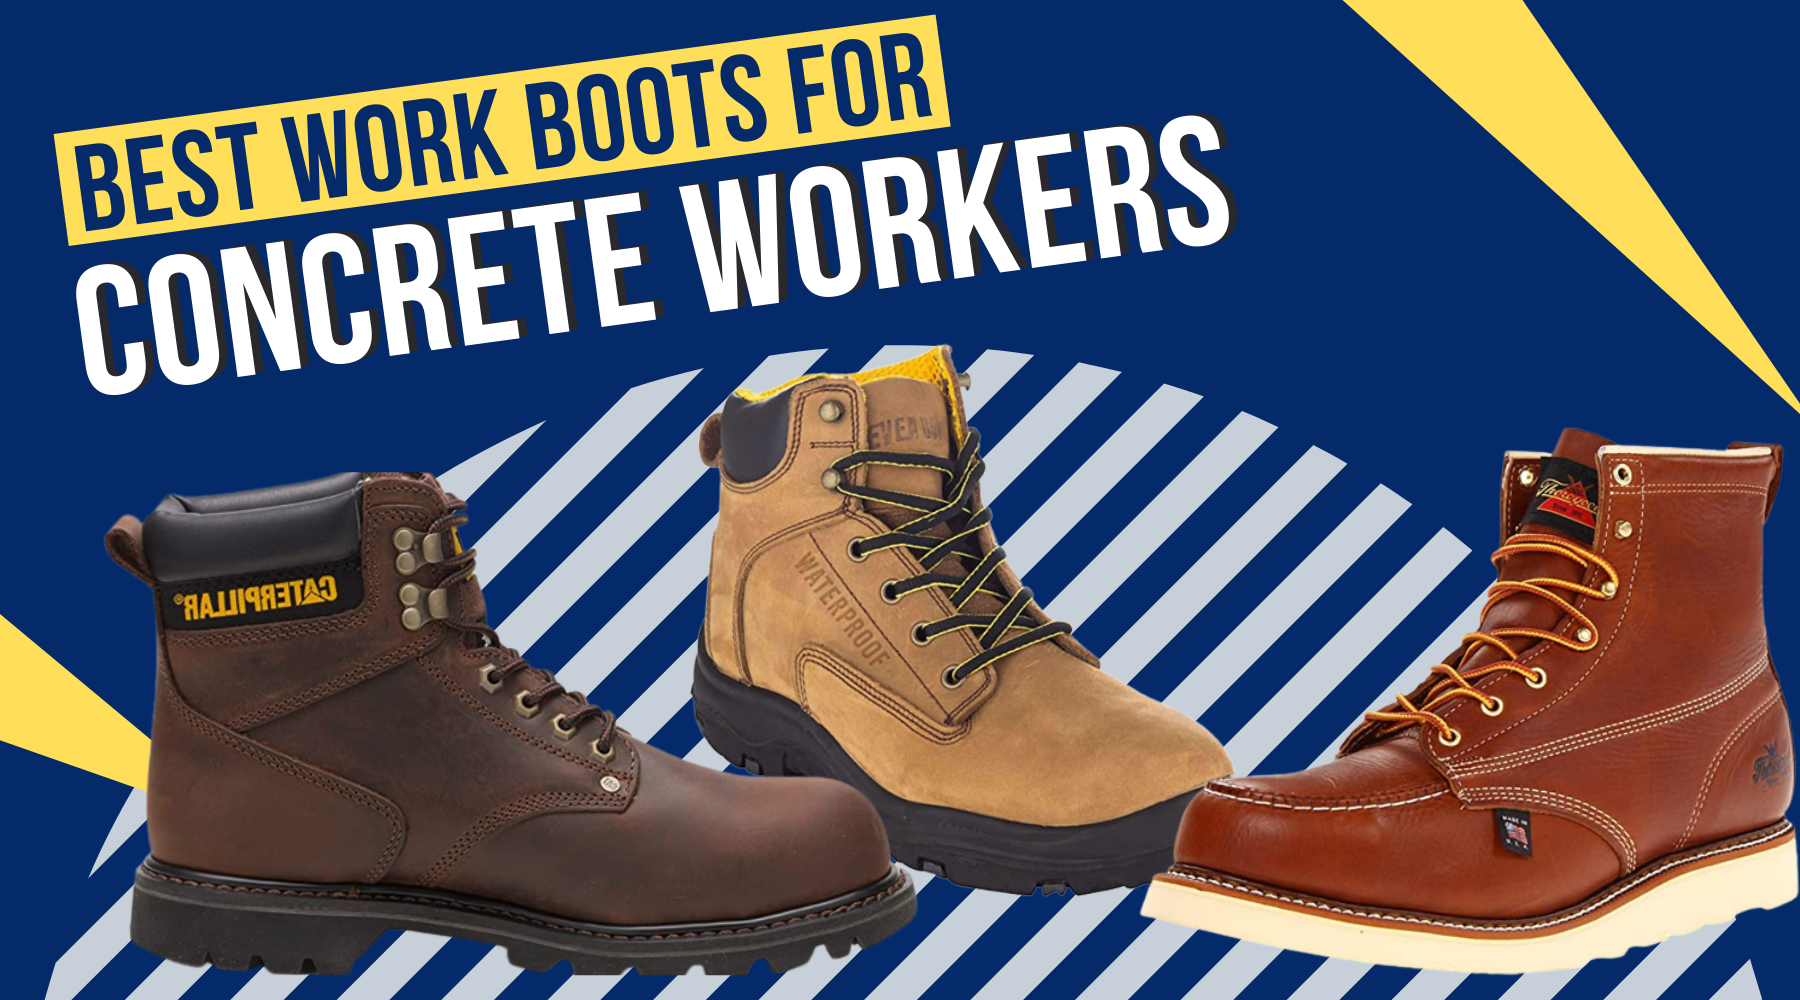 Best Work Boots For Concrete Workers